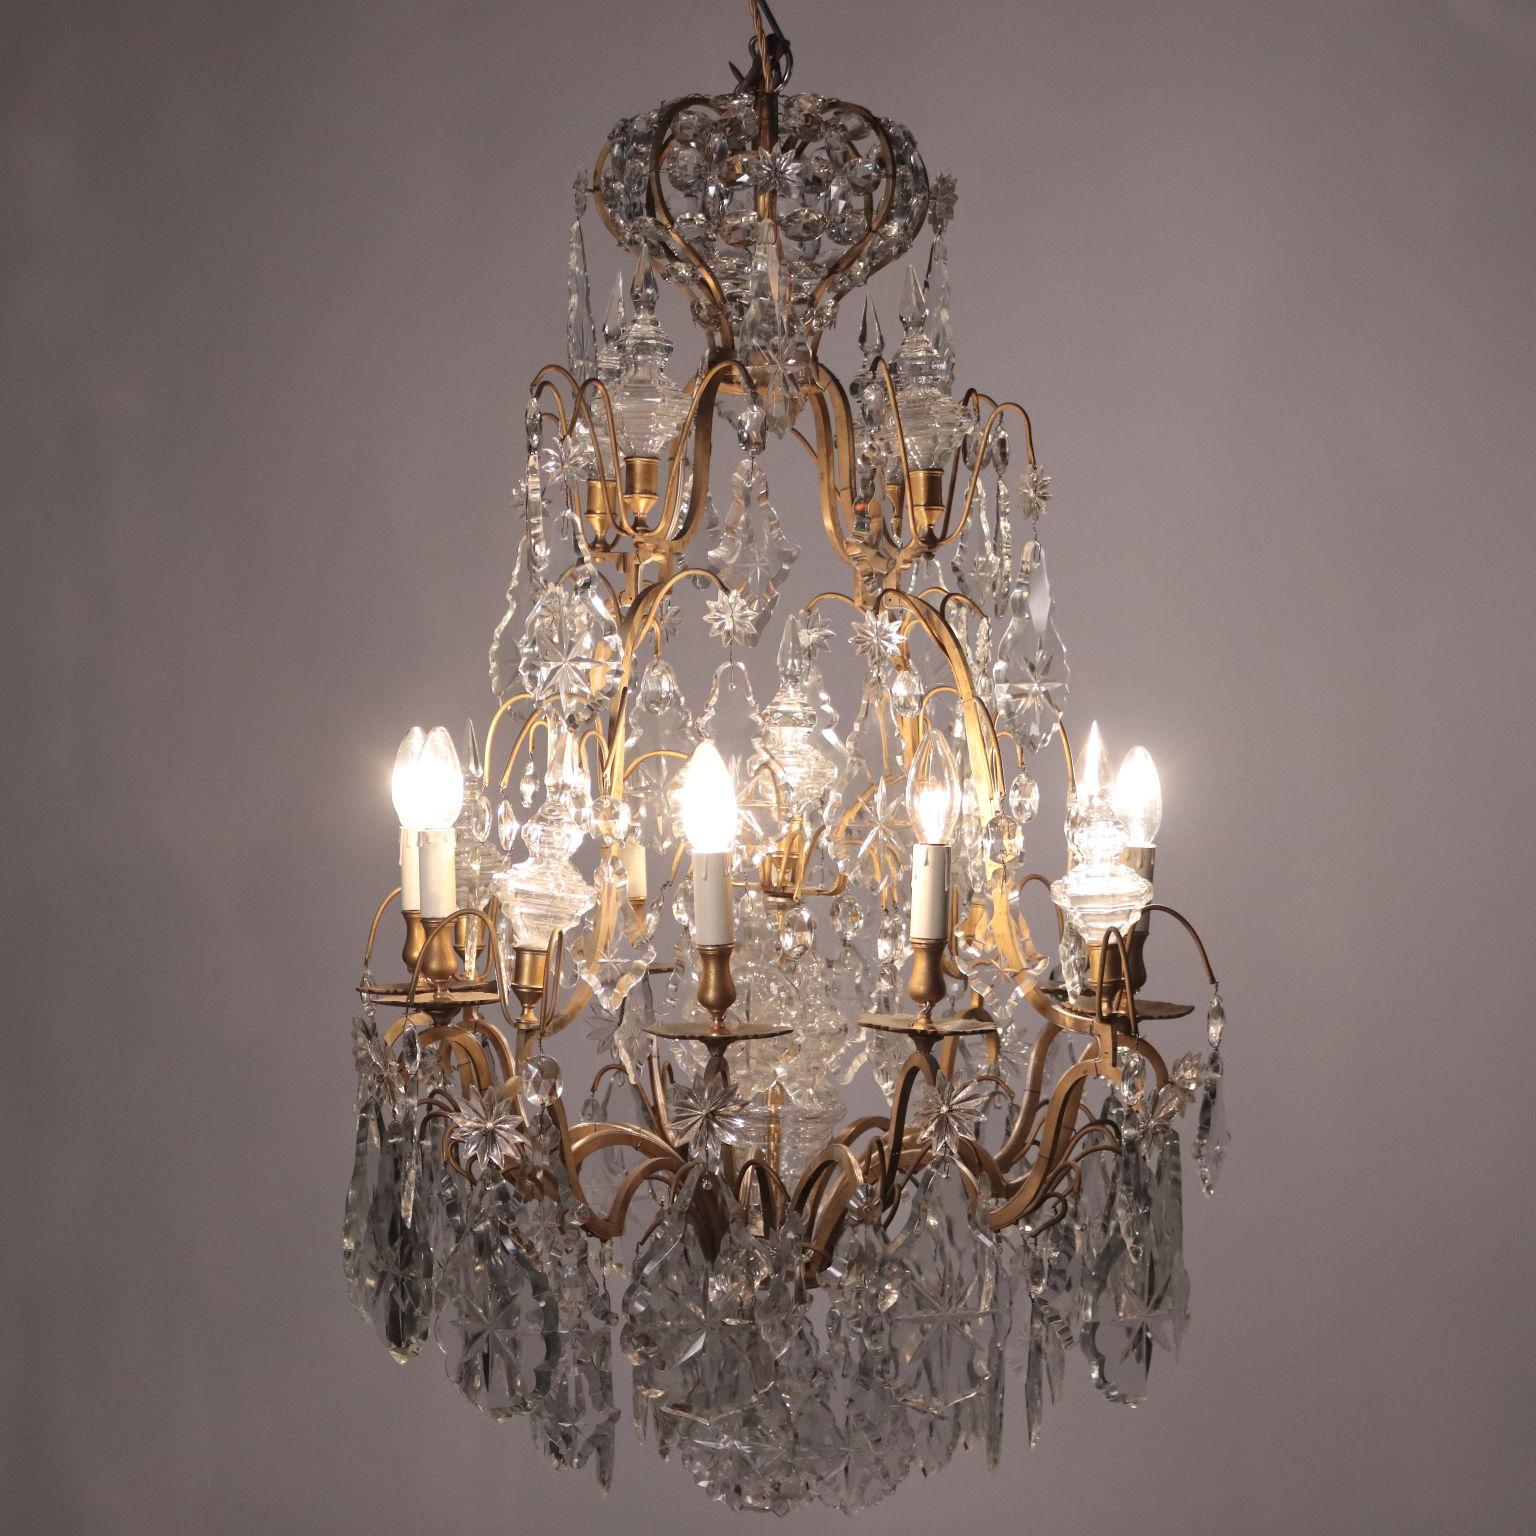 Other Pair of Chandeliers Glass Bronze, Italy, Late 19th Century